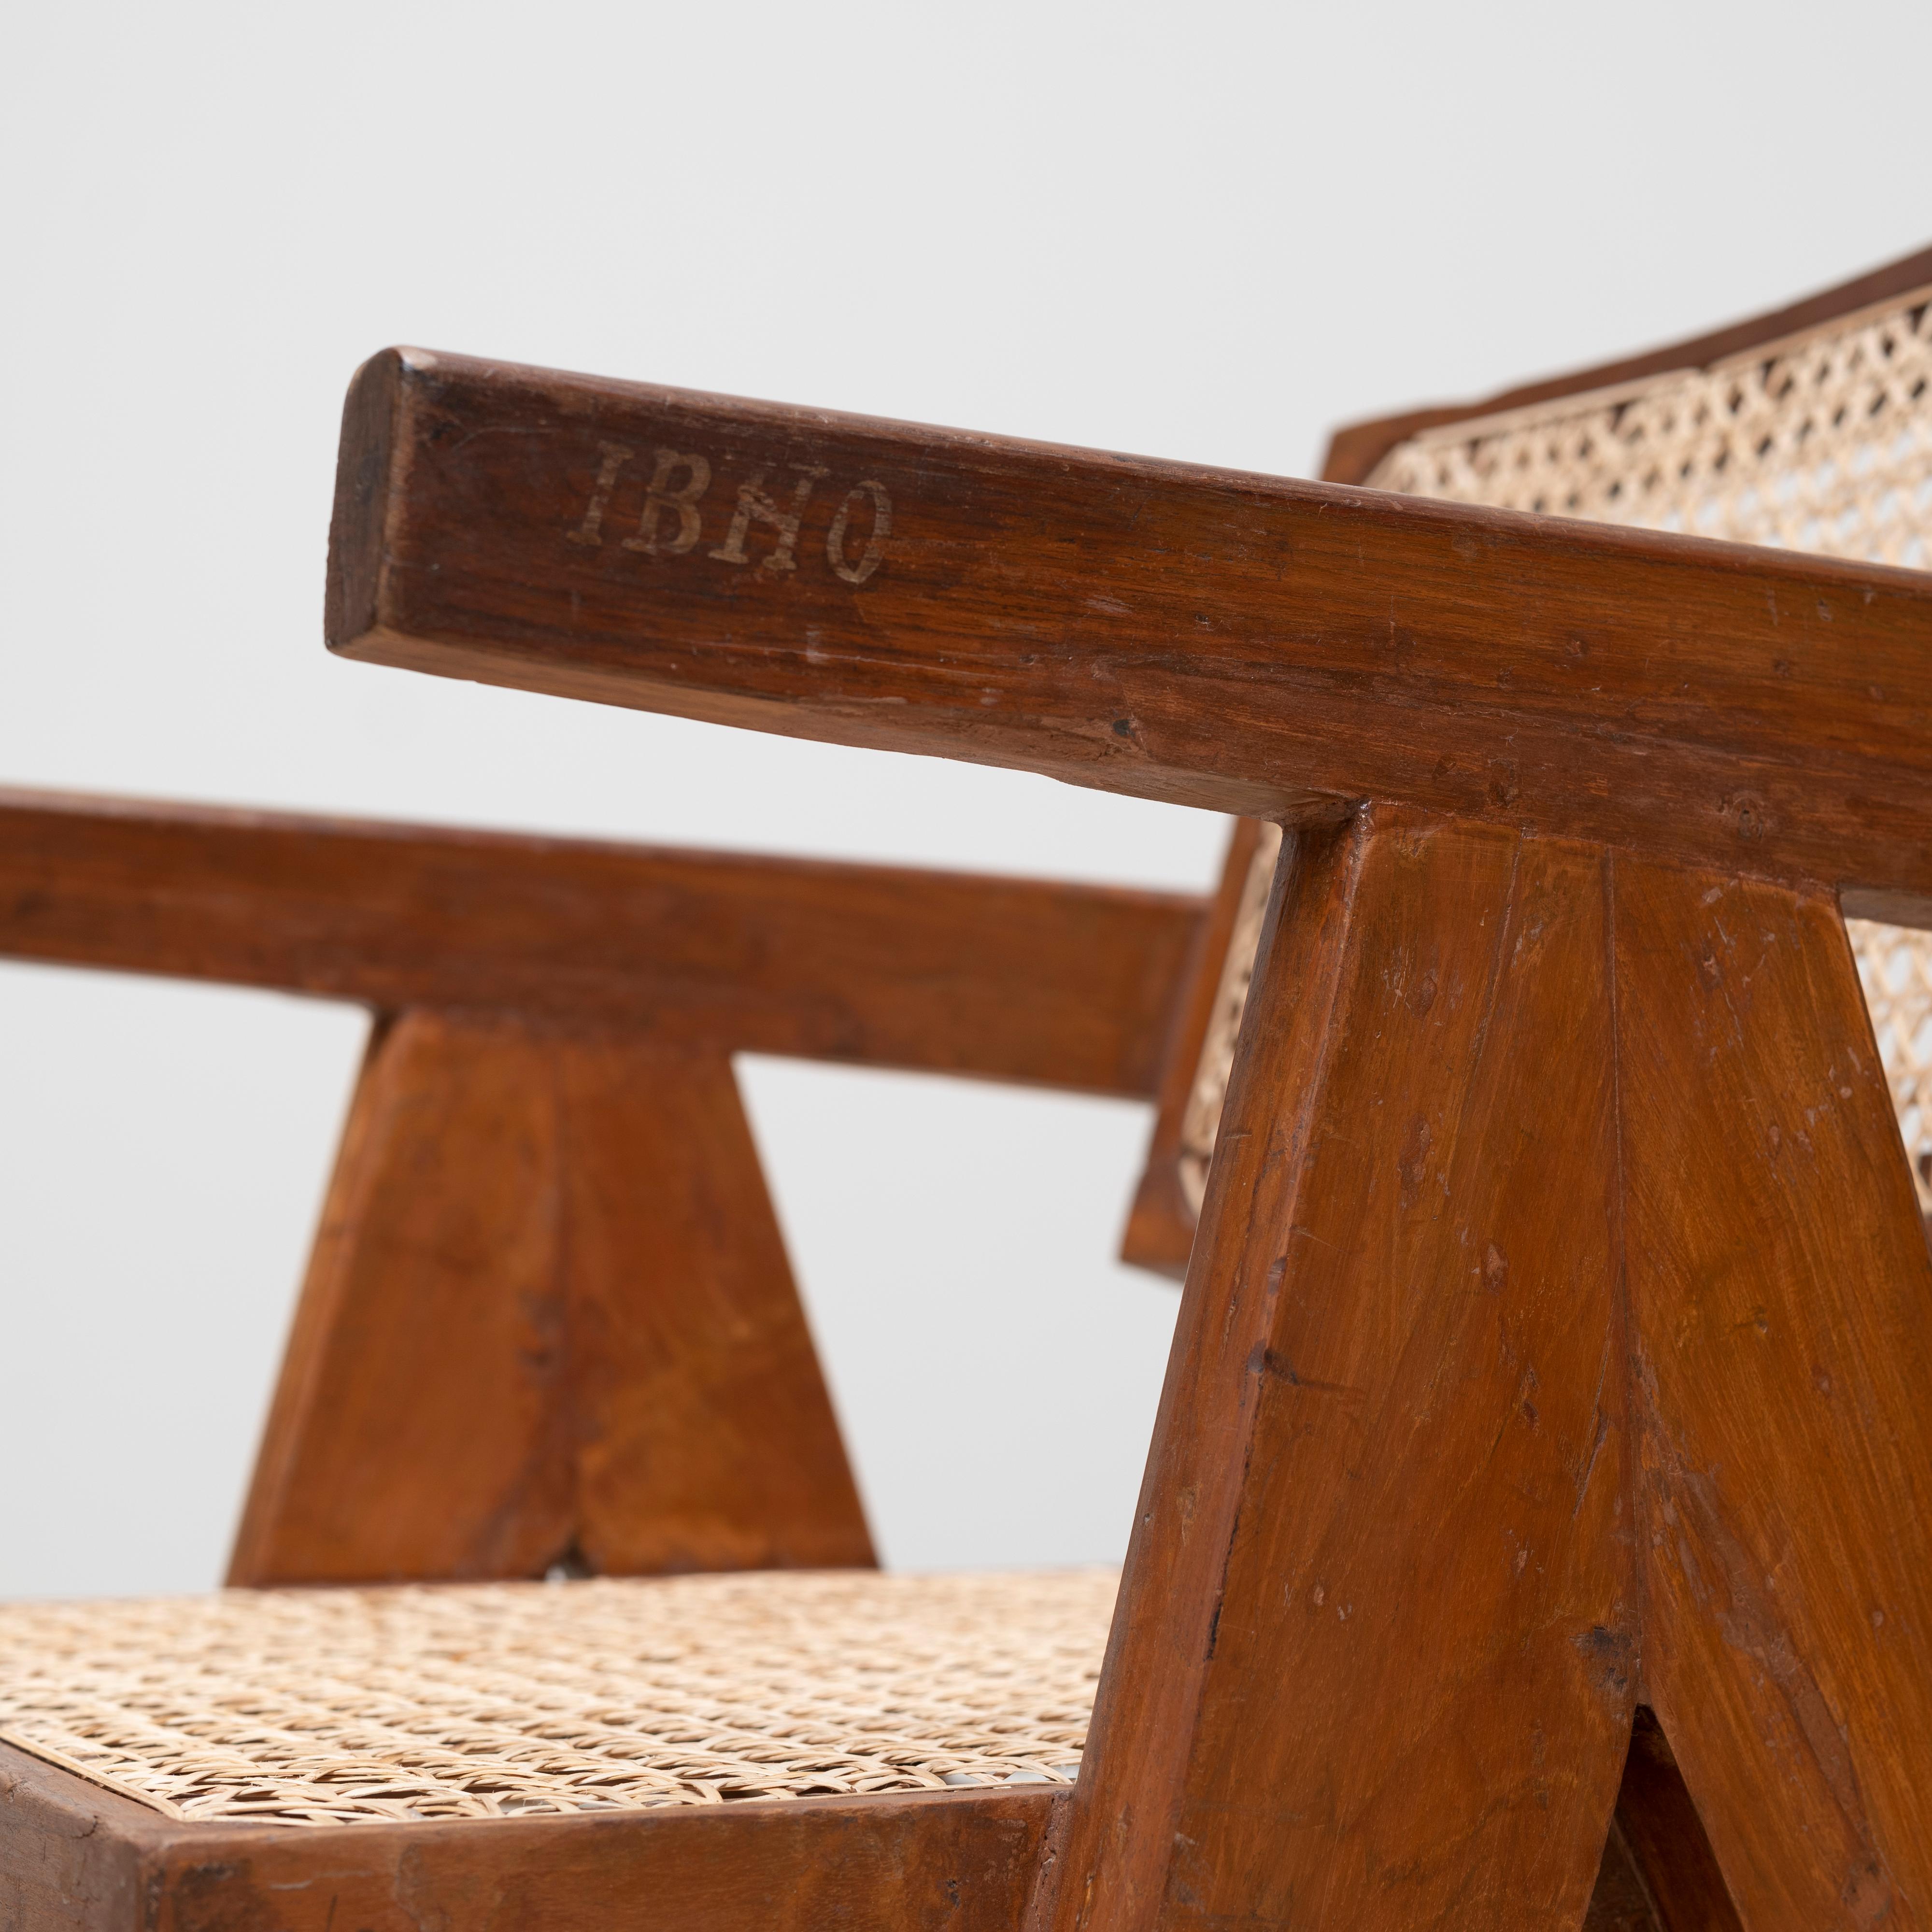 Teak Pierre Jeanneret Office Chair, Circa 1955-56, Chandigarh, India For Sale